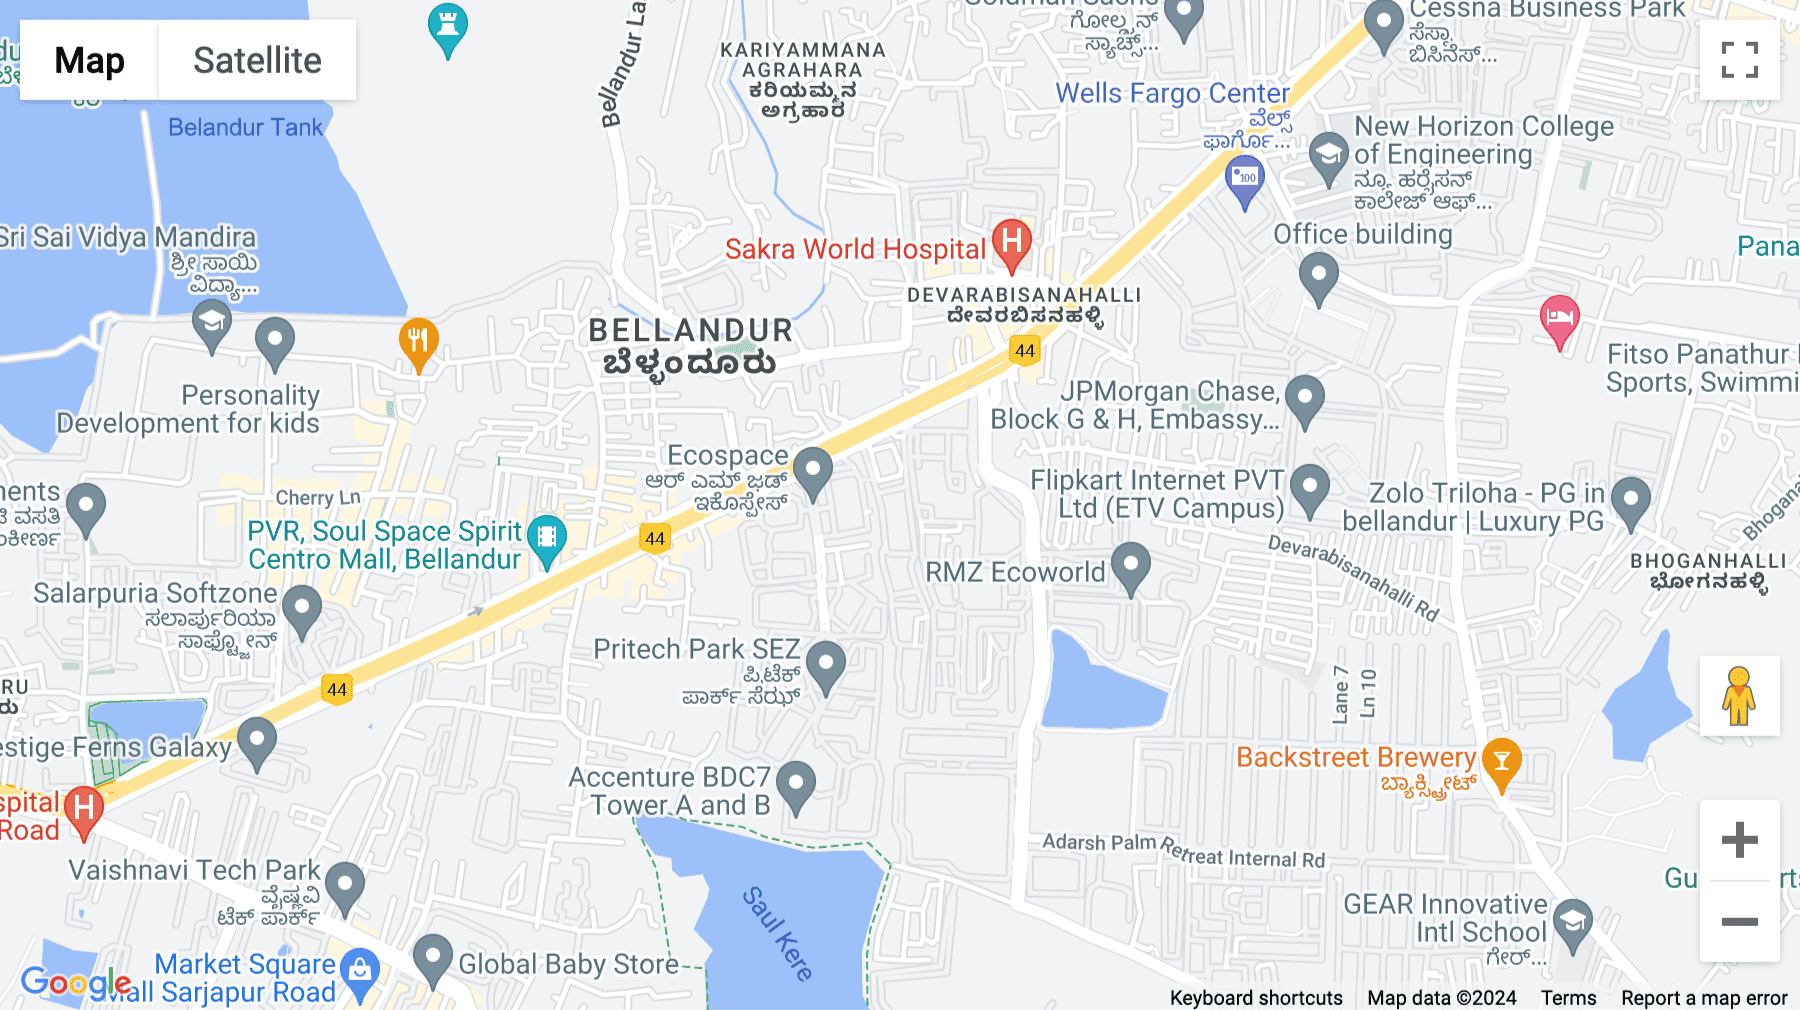 Bagmane Developers is planning to develop a massive commercial building in  Bellandur, adjacent to Ecospace. : r/bangalore